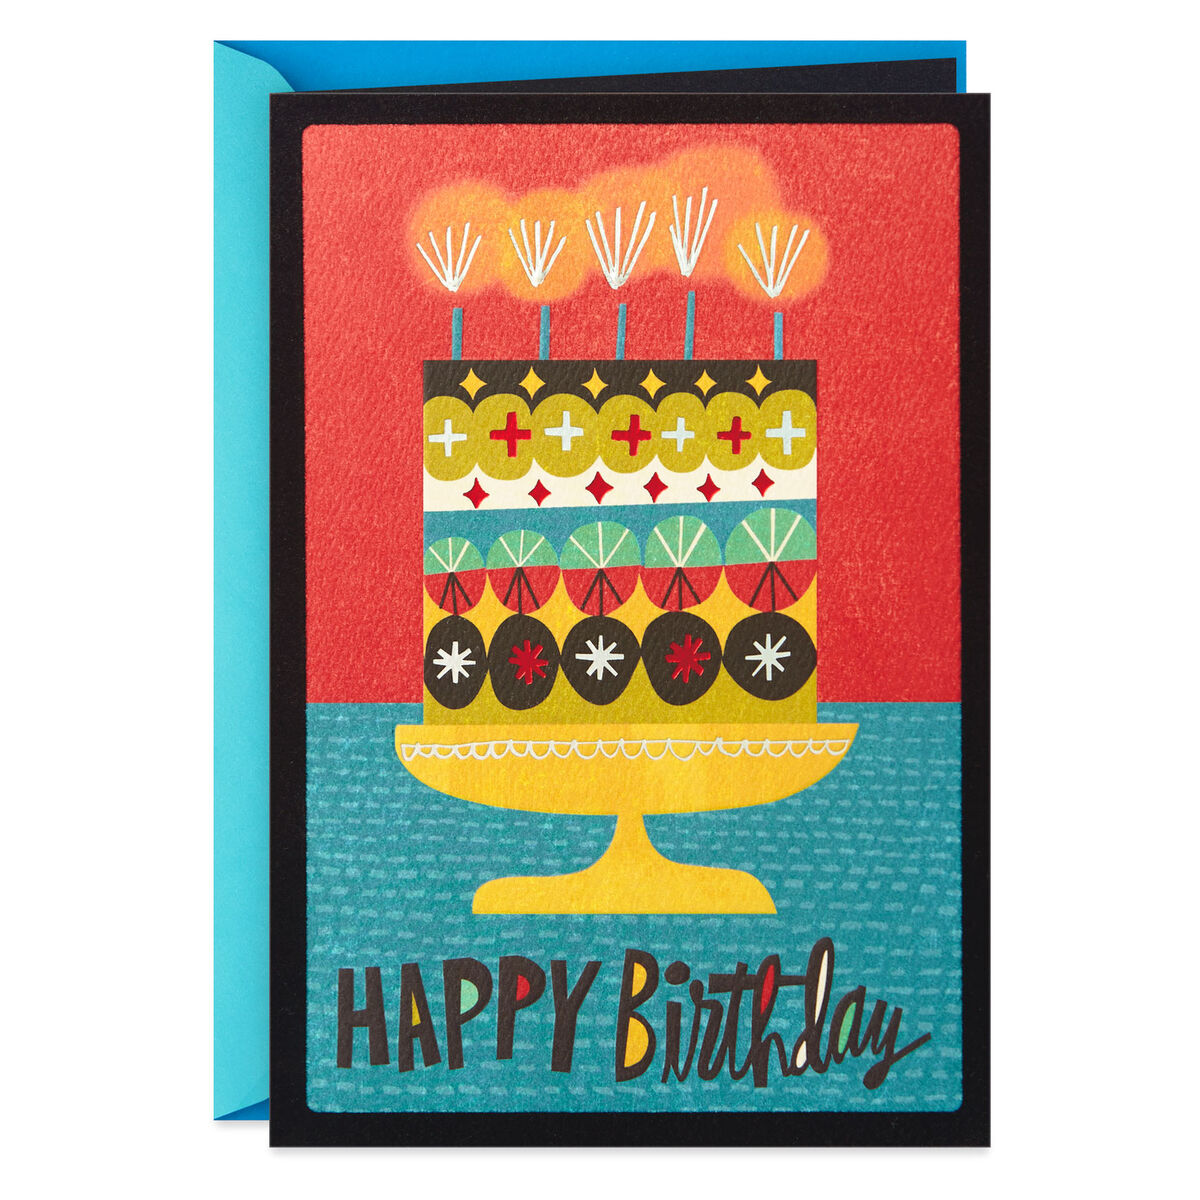 Cake with Candles Birthday Card for Son - Greeting Cards - Hallmark